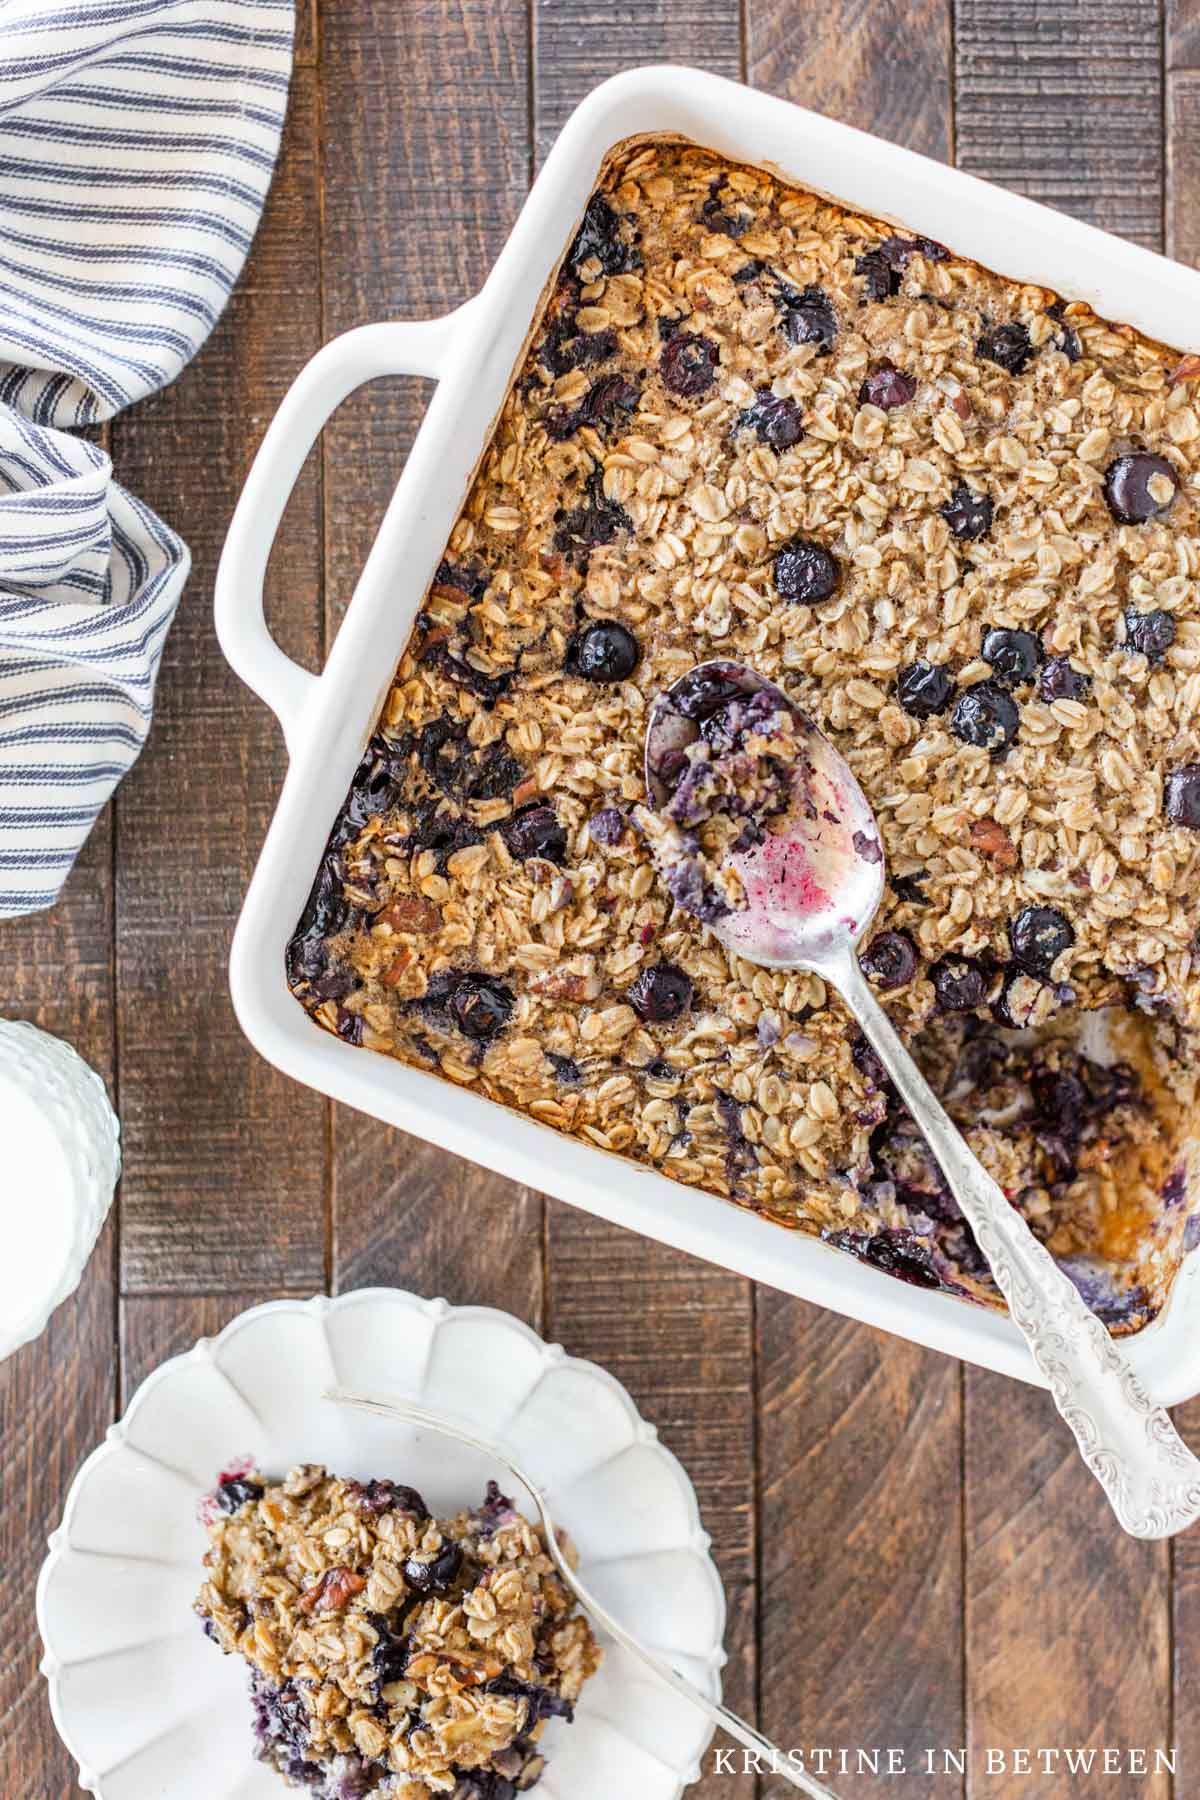 Baked blueberry pecan oatmeal in a casserole dish with a small plate next to it.